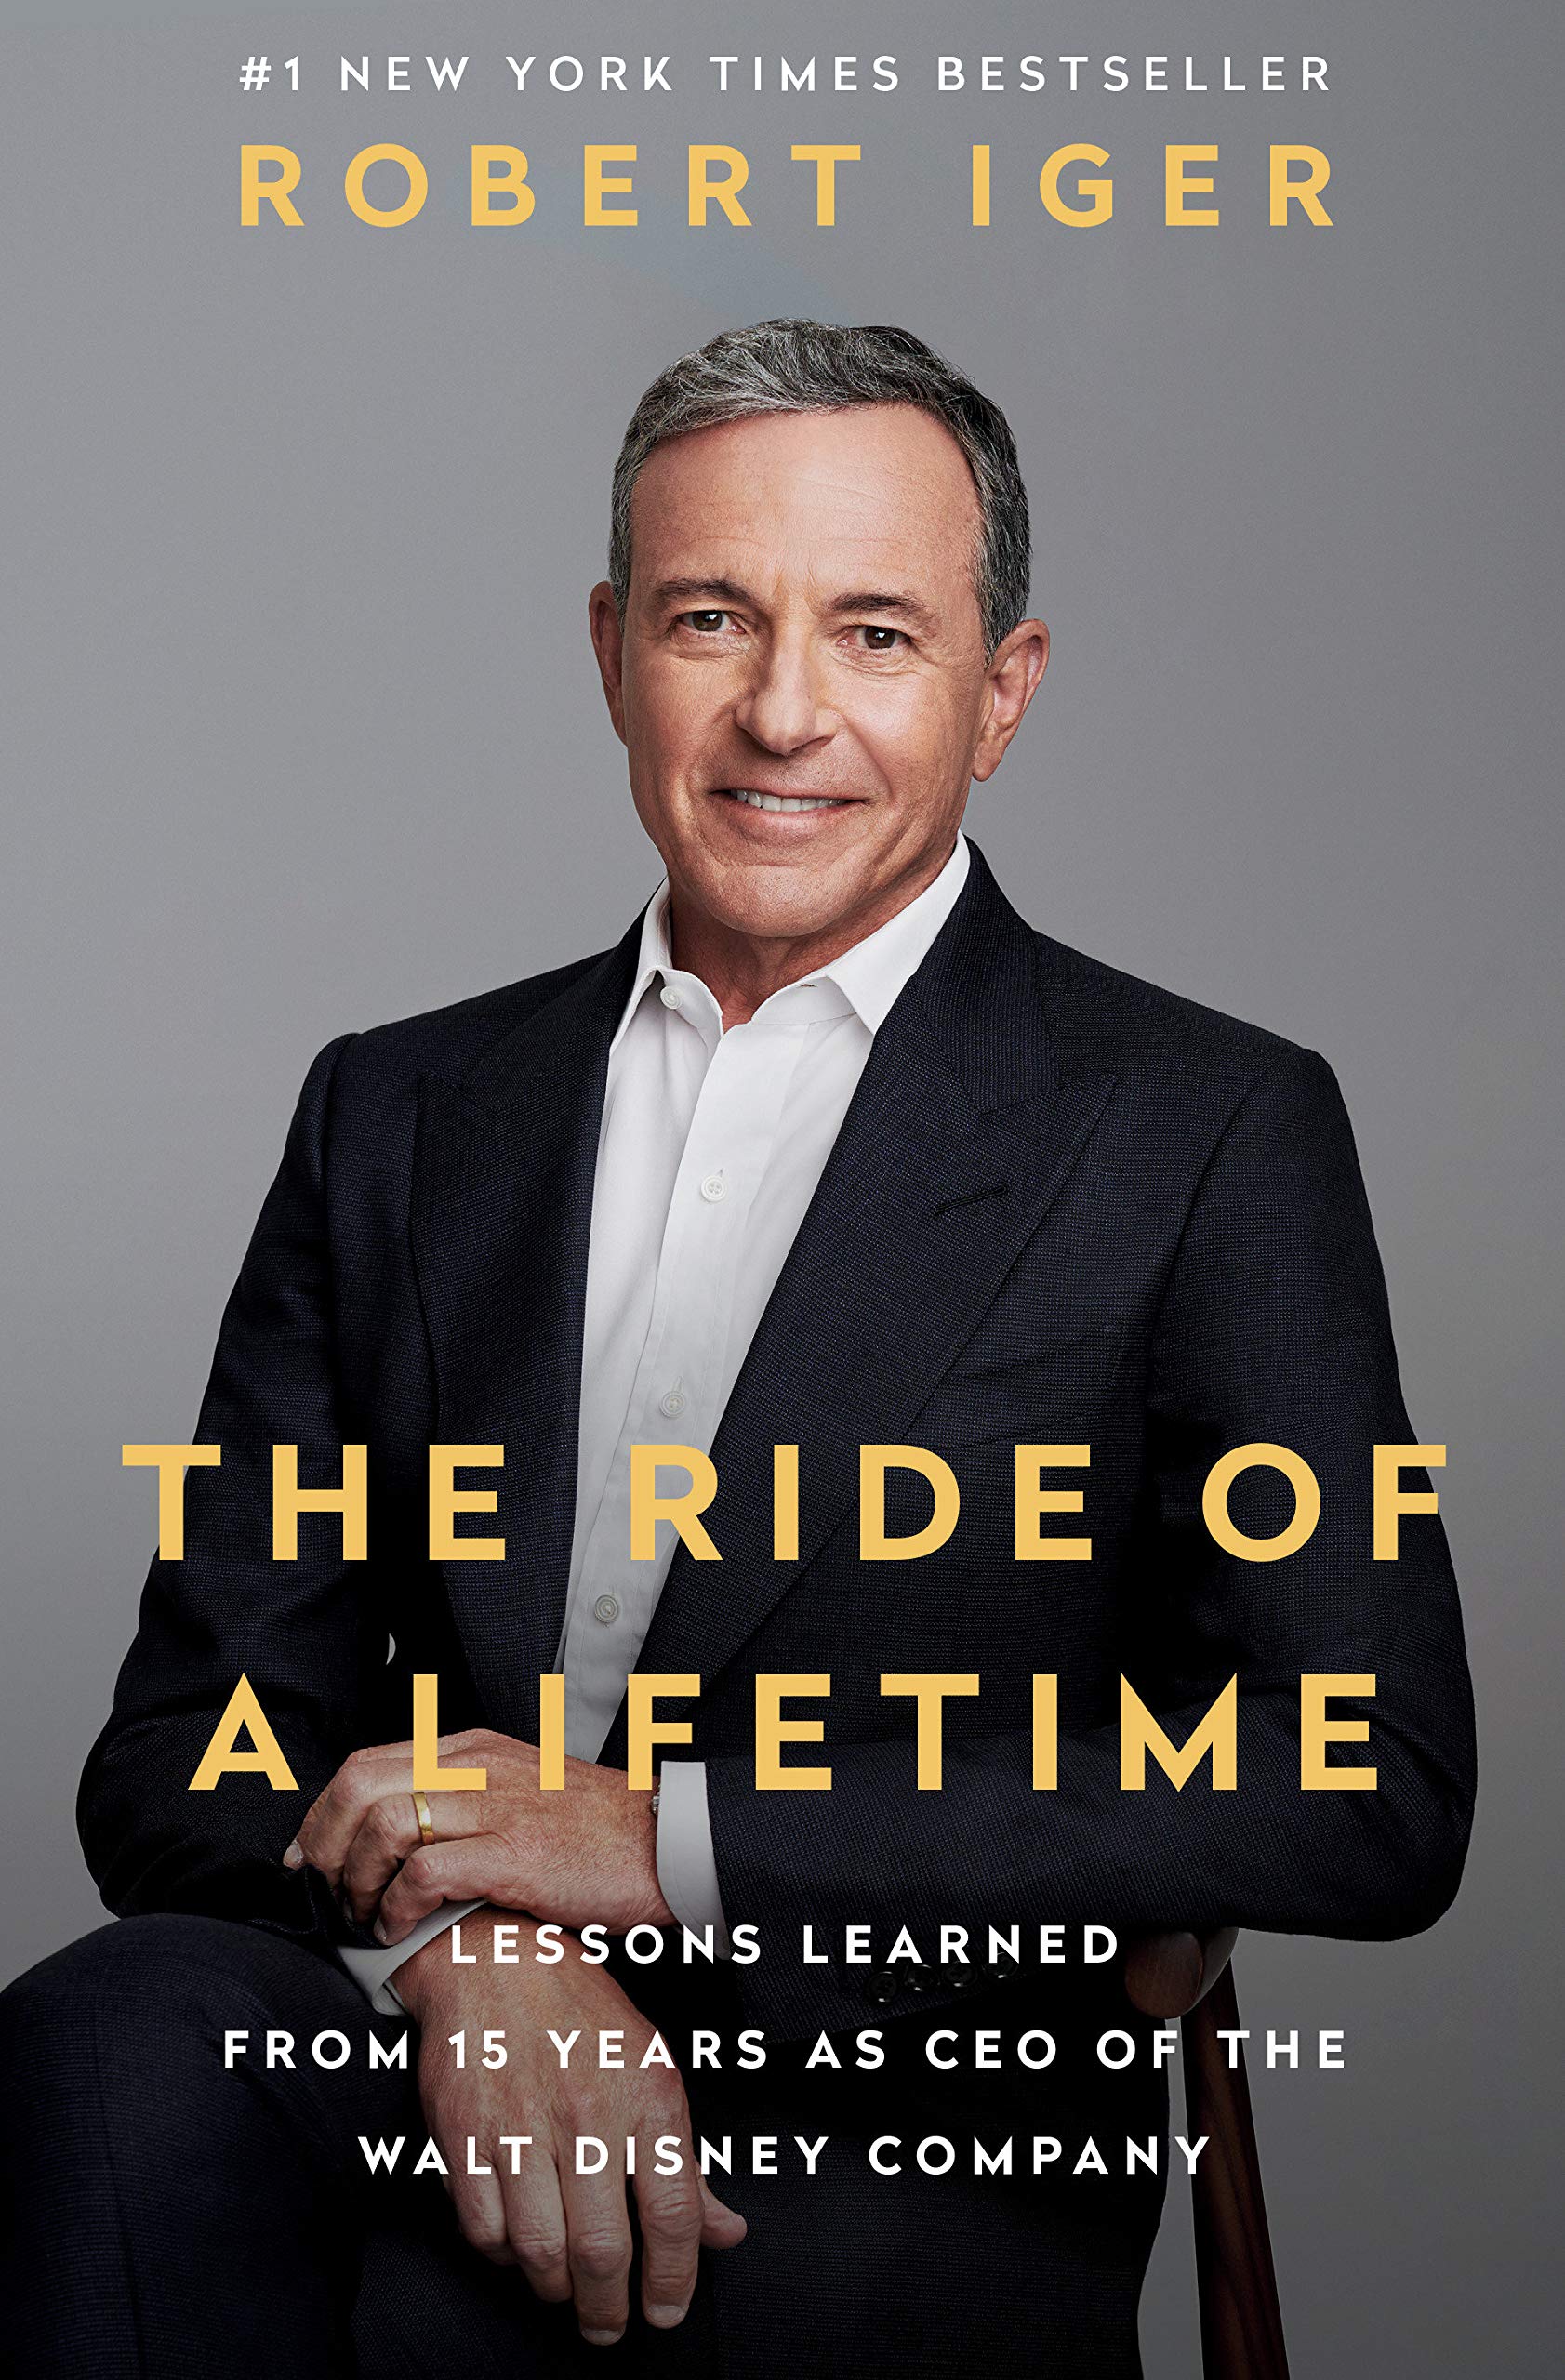 The book cover for The Ride of a Lifetime